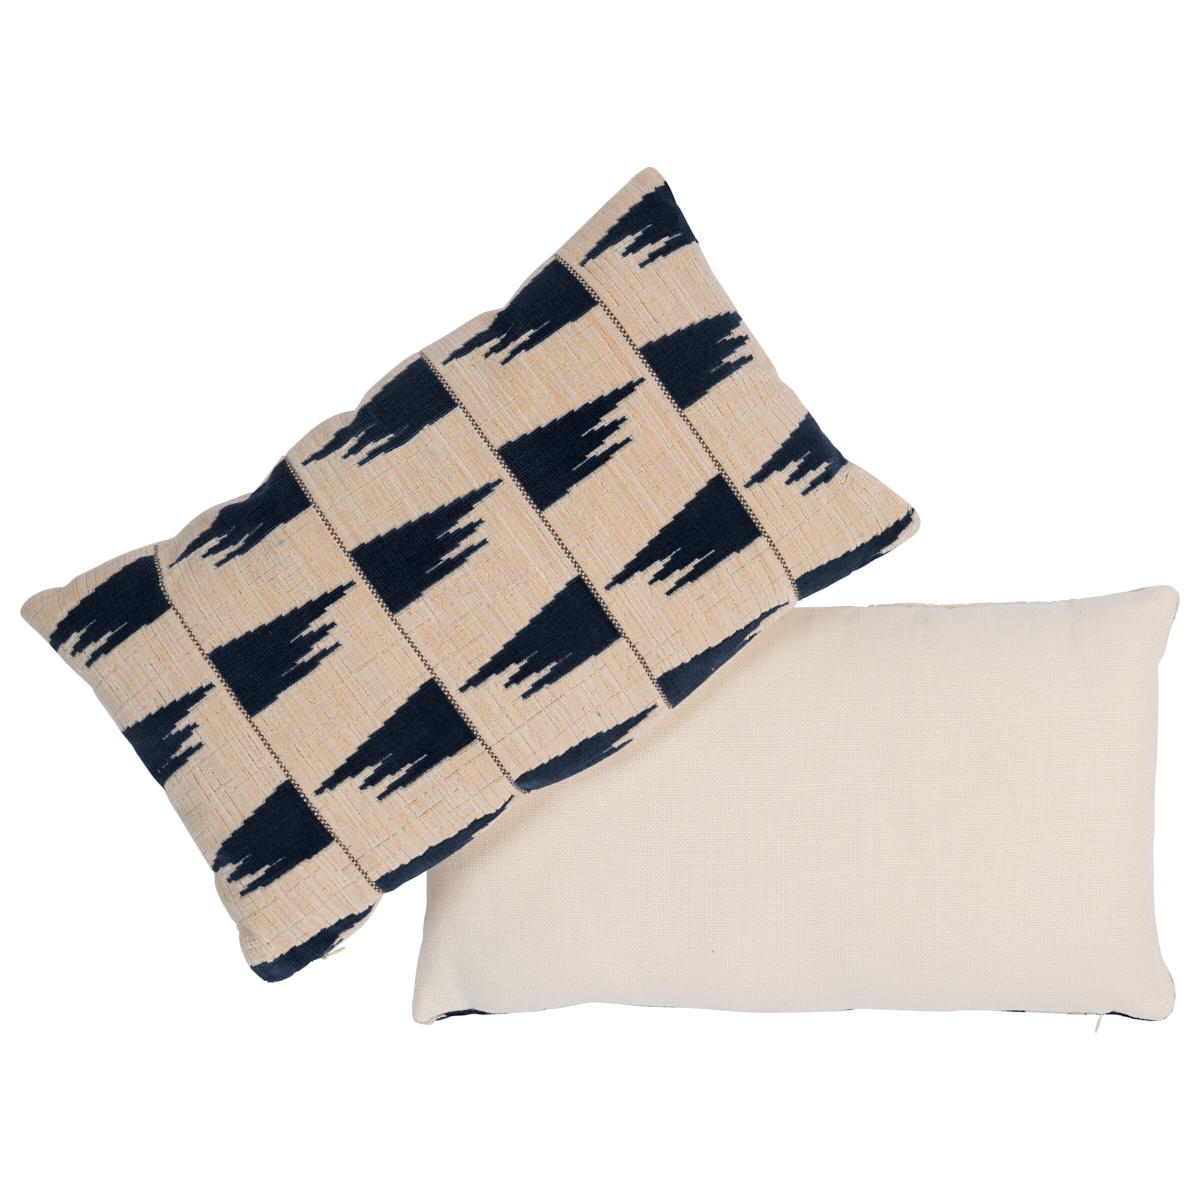 This pillow features Tutsi by David Kaihoi for Schumacher with a knife edge finish. Tutsi Velvet in blue, designed by David Kaihoi, is a hard-wearing yet sophisticated heavyweight fabric with both cut and loop pile for added texture and depth. The